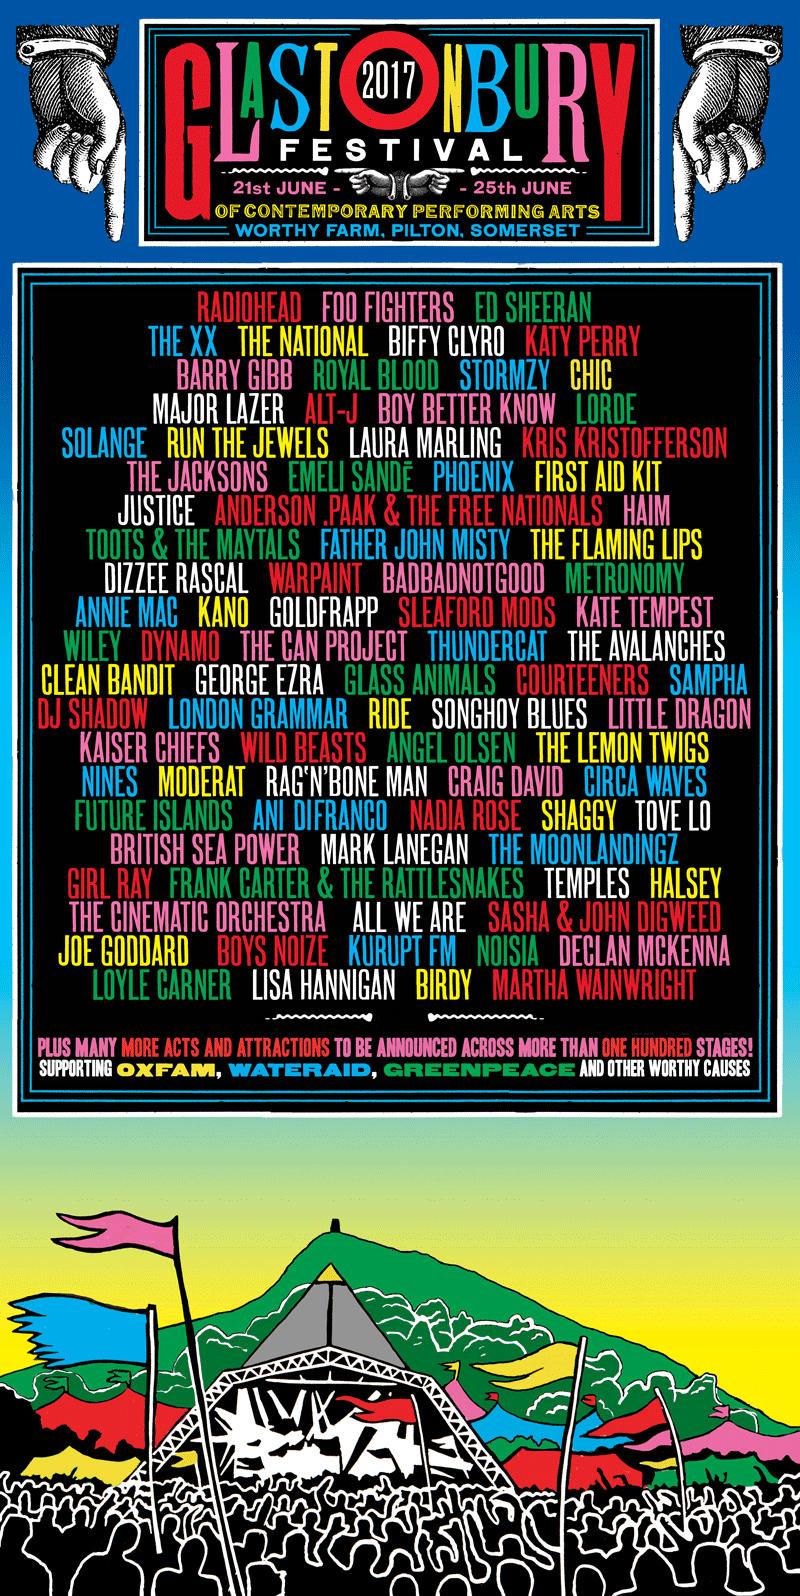 glastonbury Glastonbury once again sets the gold standard with its 2017 lineup